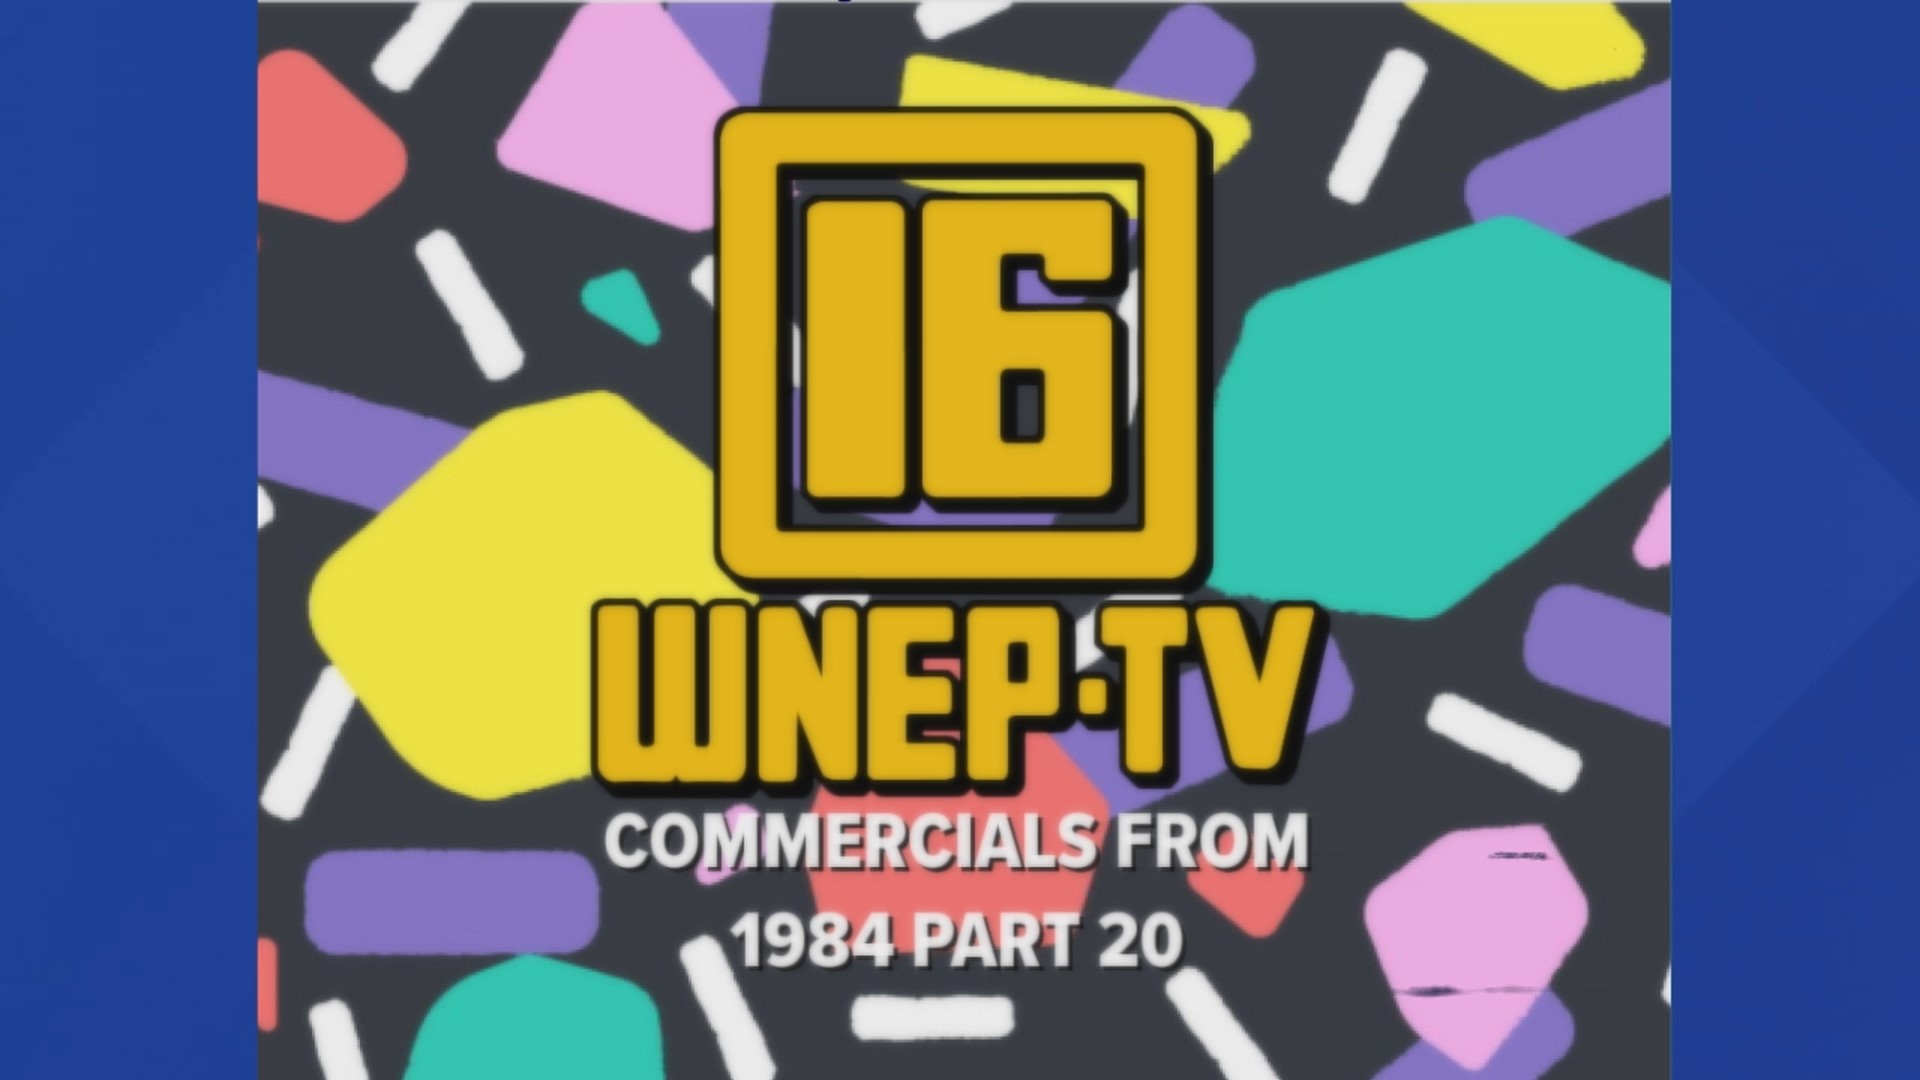 Watch some of the commercials that were on WNEP in 1984.